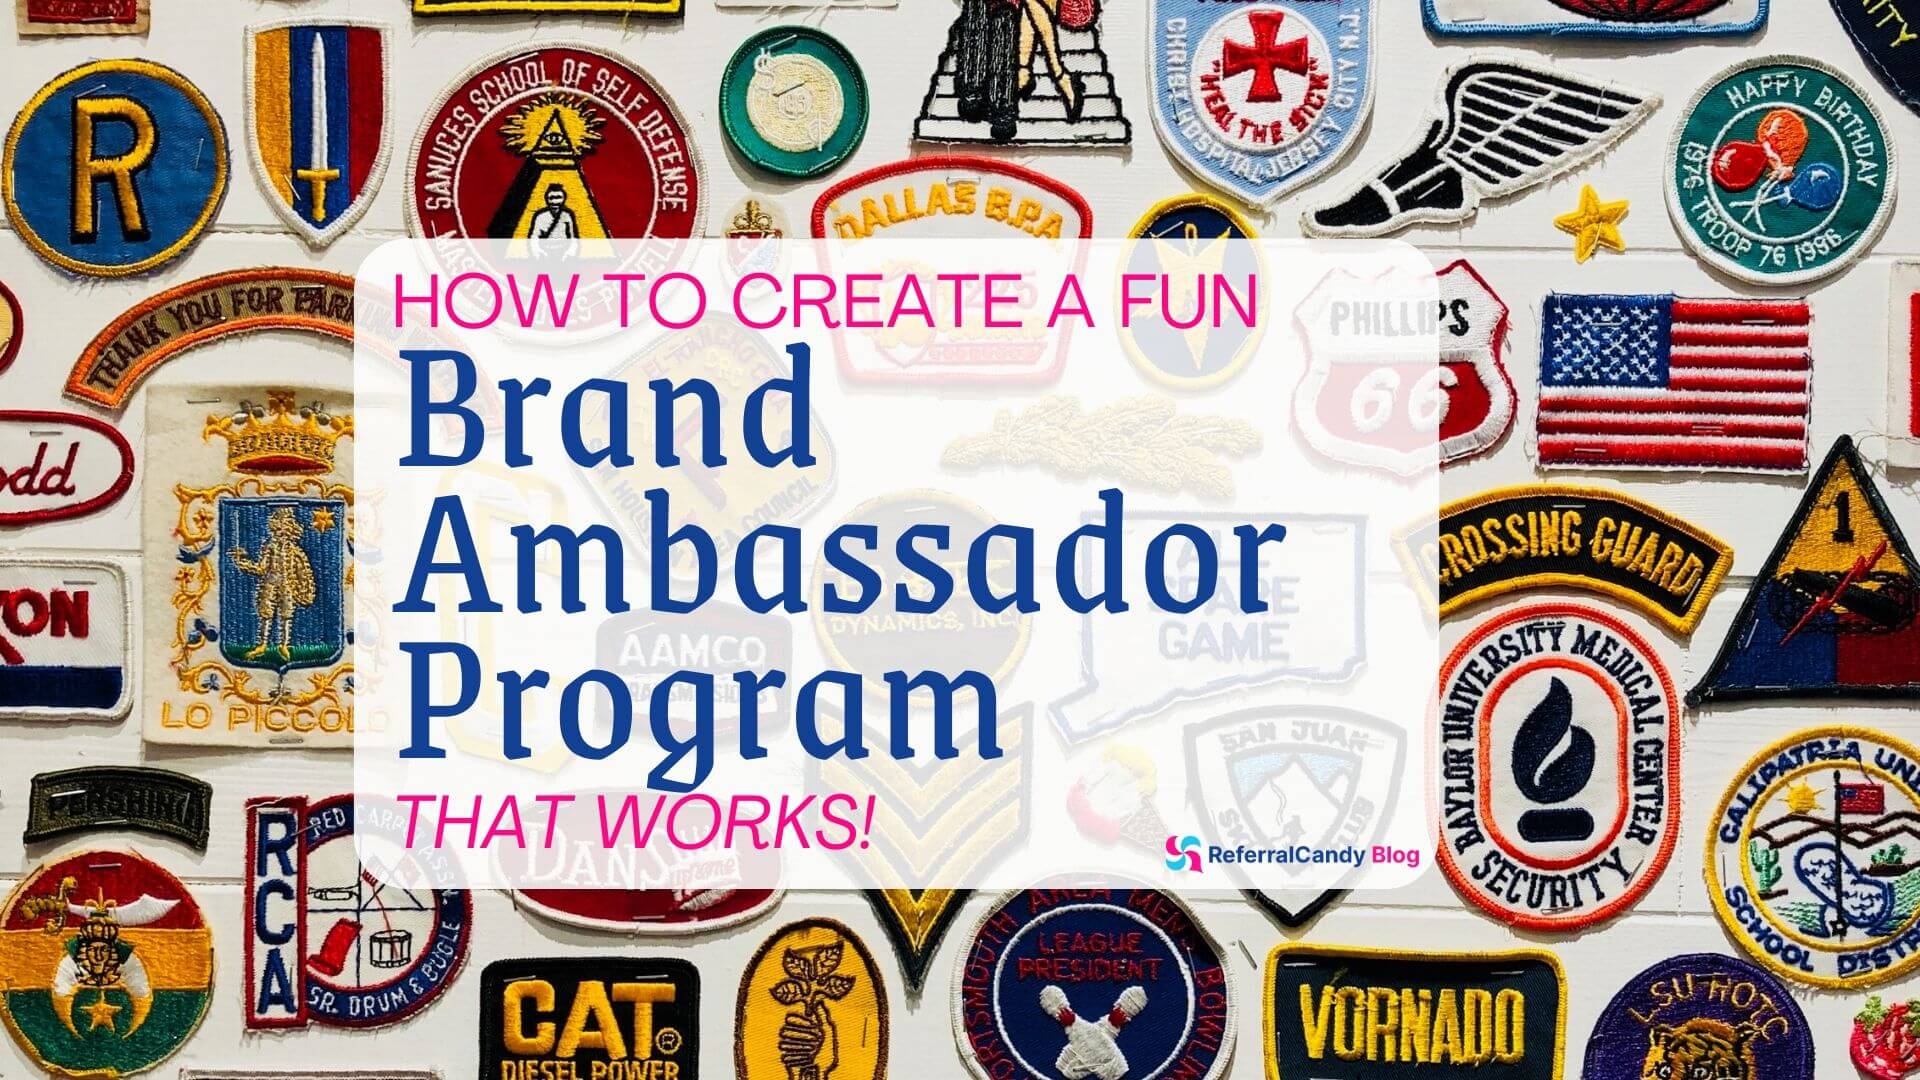 5 Tips For Creating A Fun Brand Ambassador Program That Works